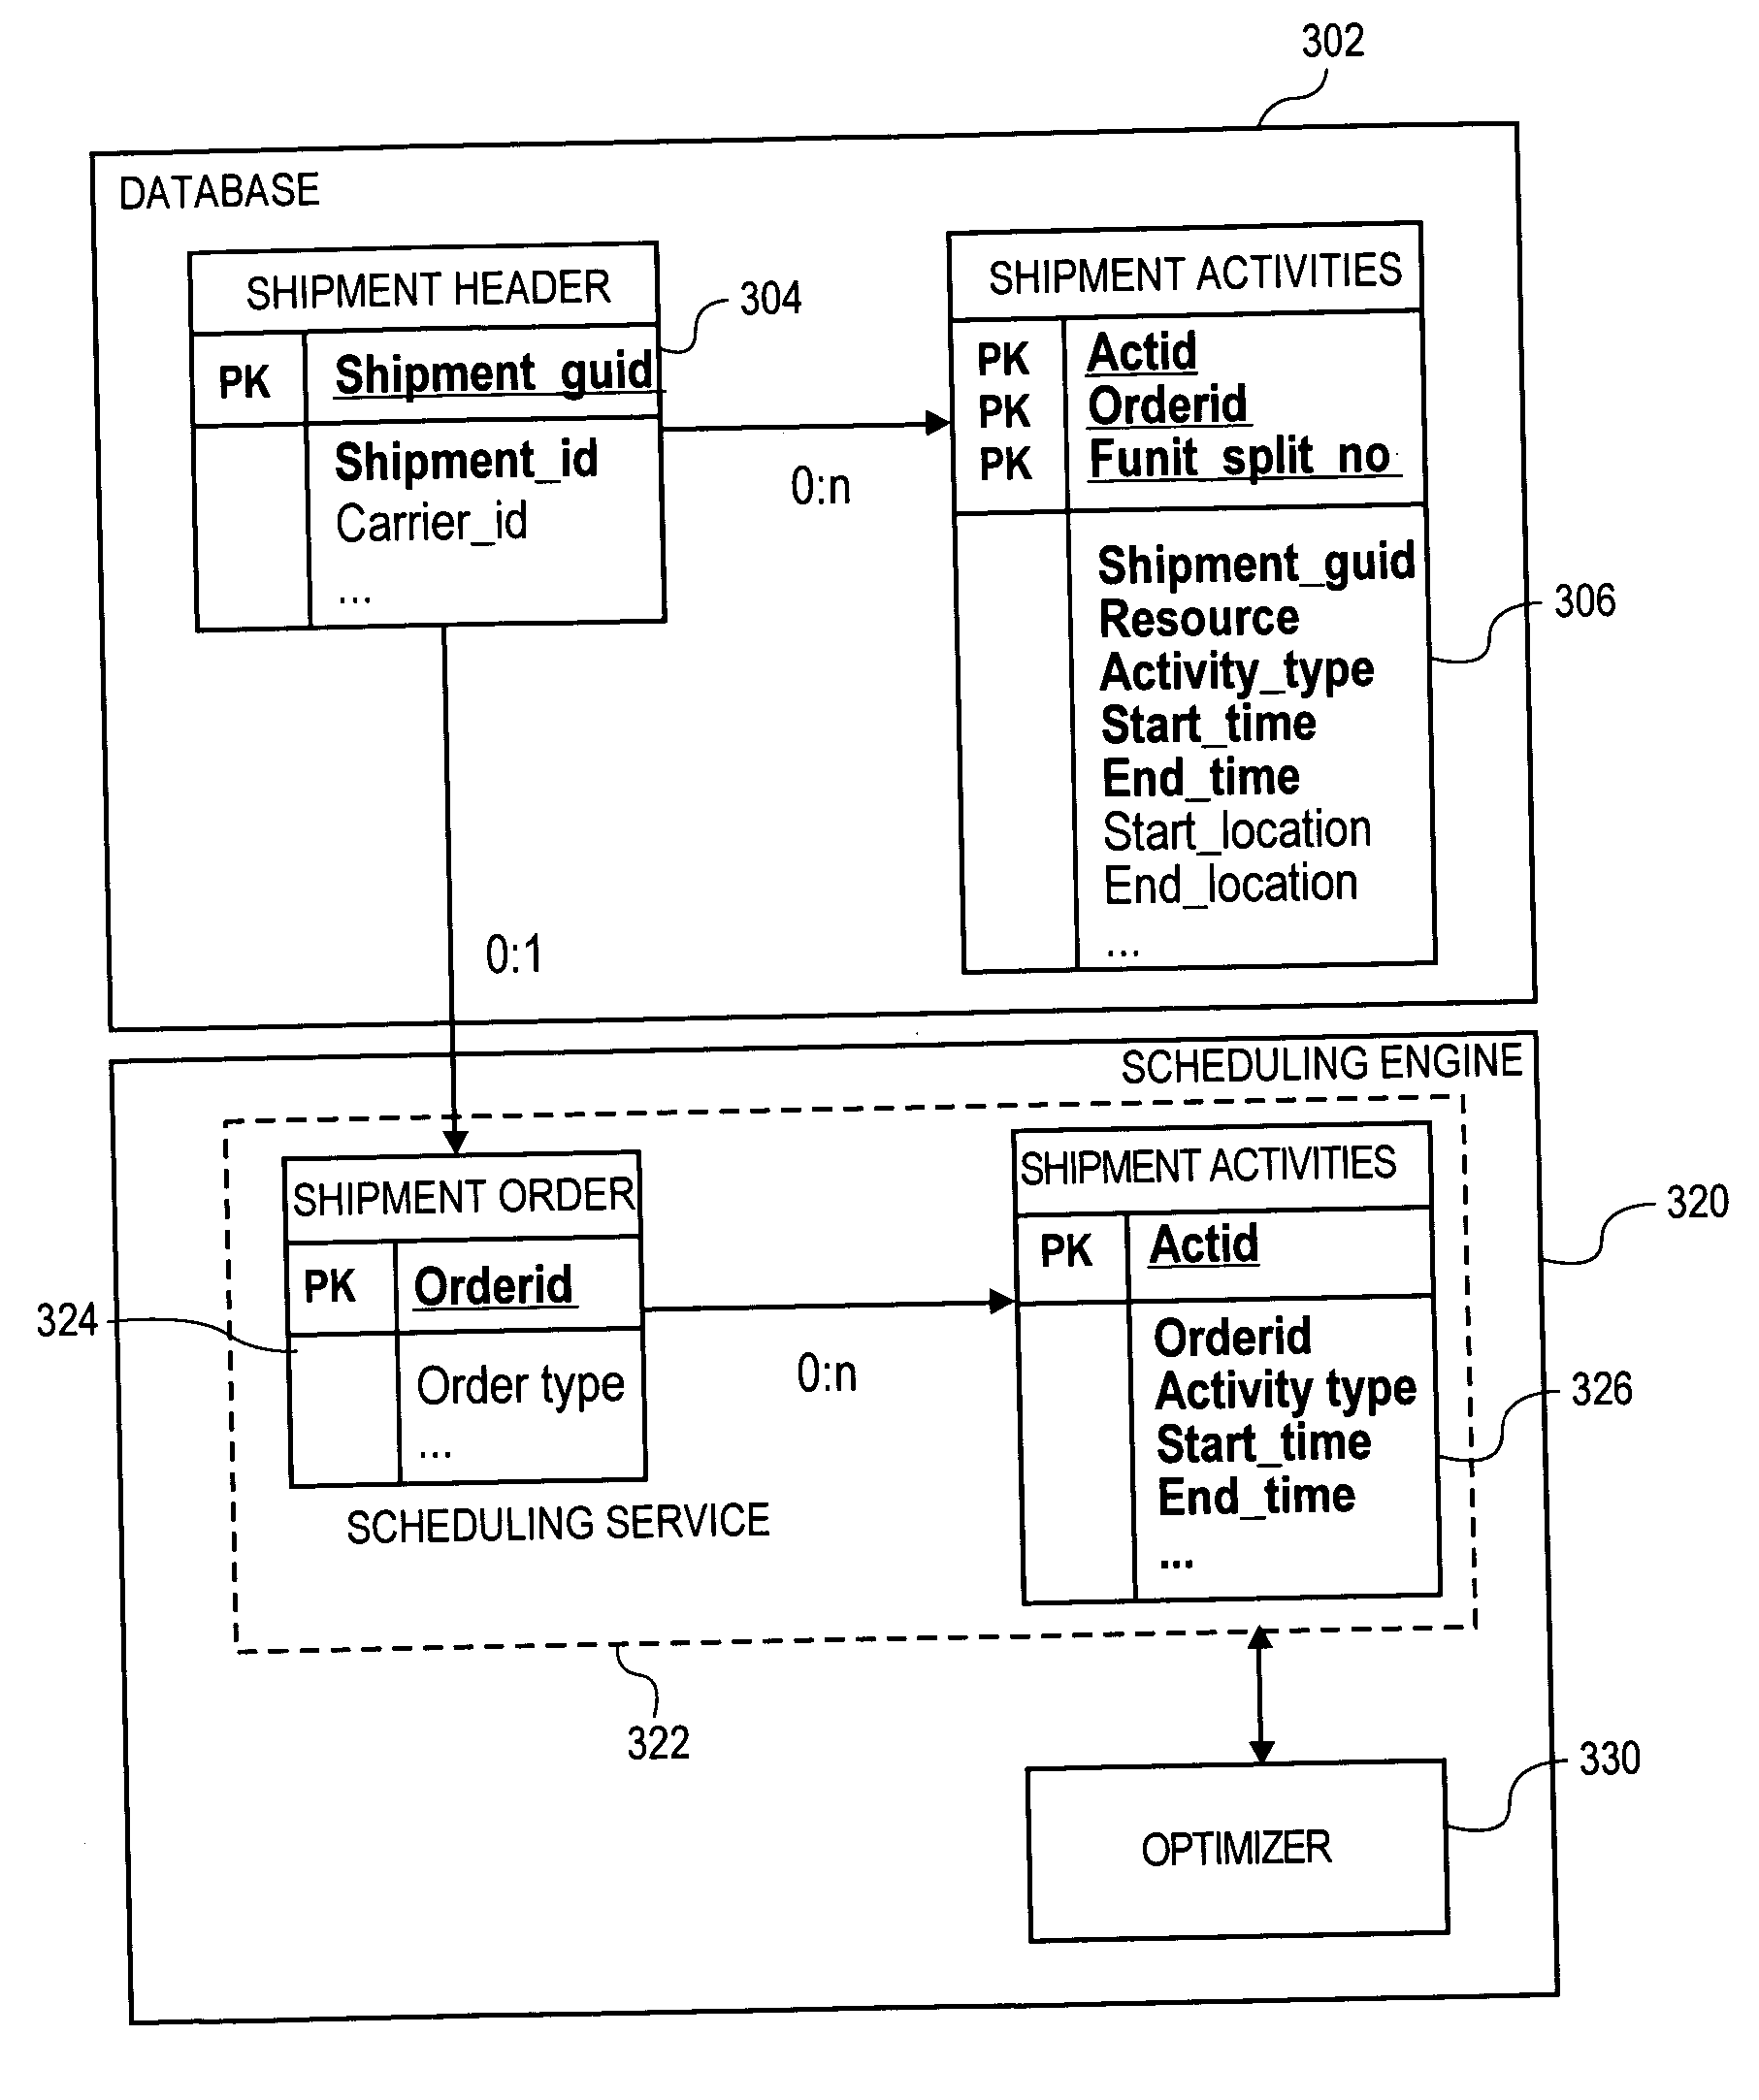 System and method of rule-based control over transportation plan in case of order changes